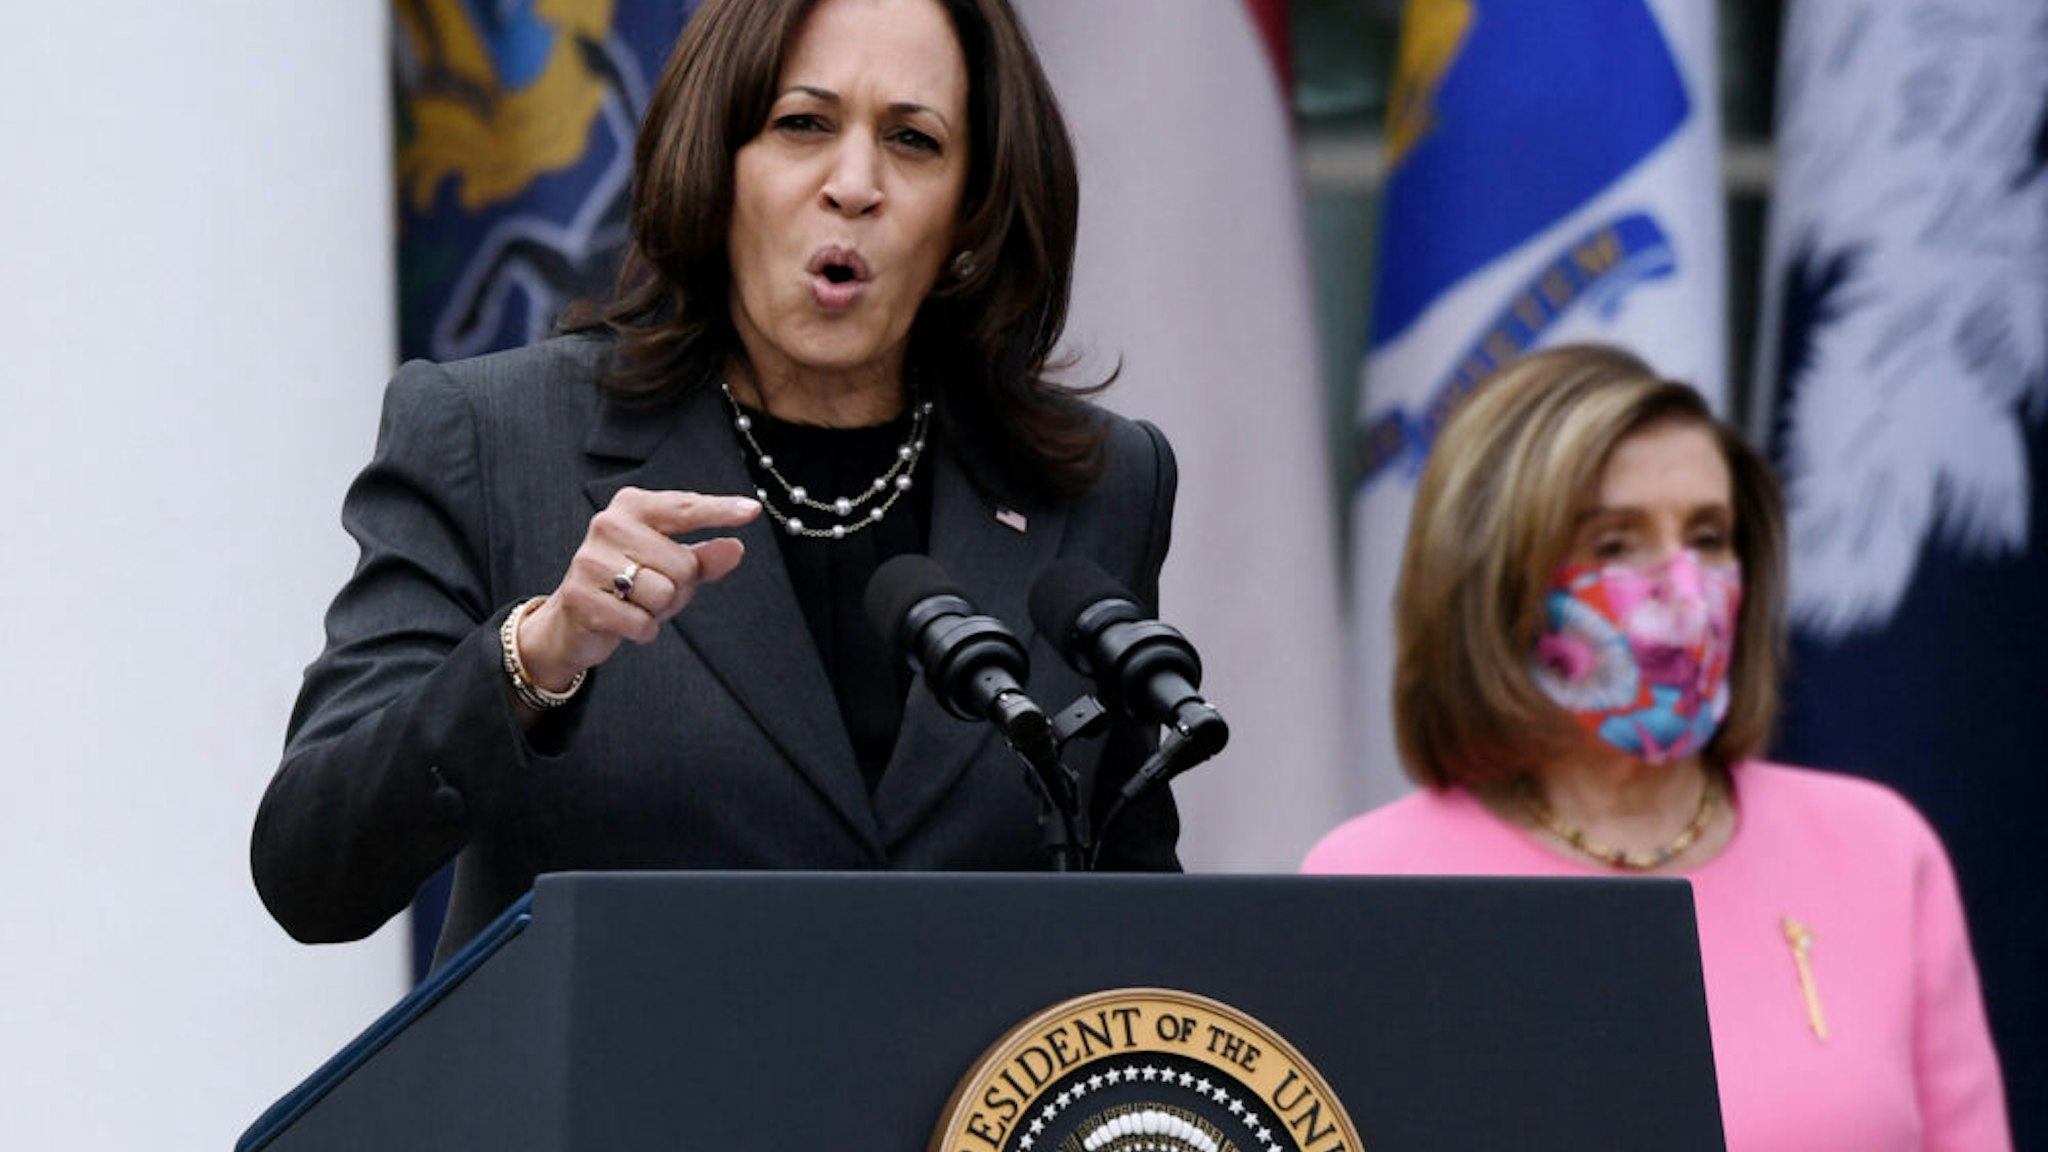 US Vice President Kamala Harris speaks as House Speaker Nancy Pelosi (D-CA) listens during an event on the American Rescue Plan in the Rose Garden of the White House in Washington, DC, on March 12, 2021.